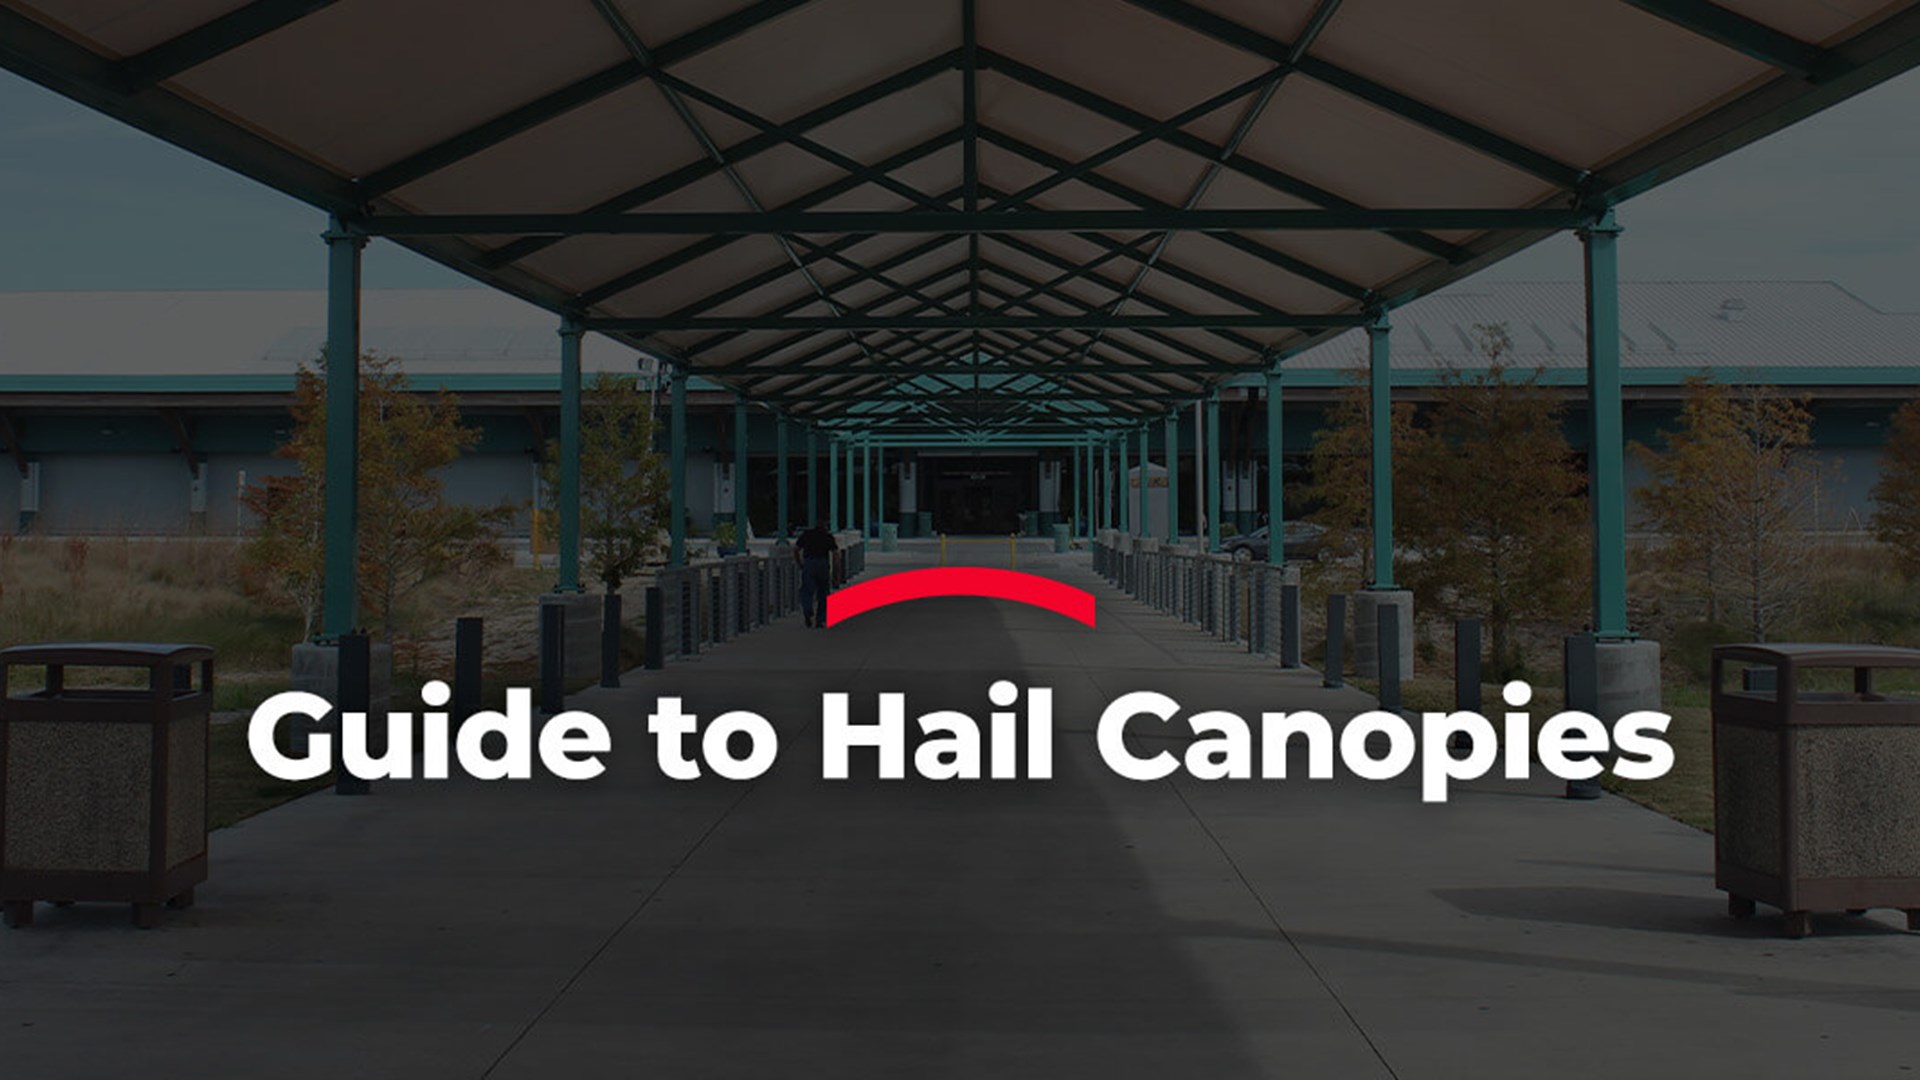 Guide to Hail Canopies